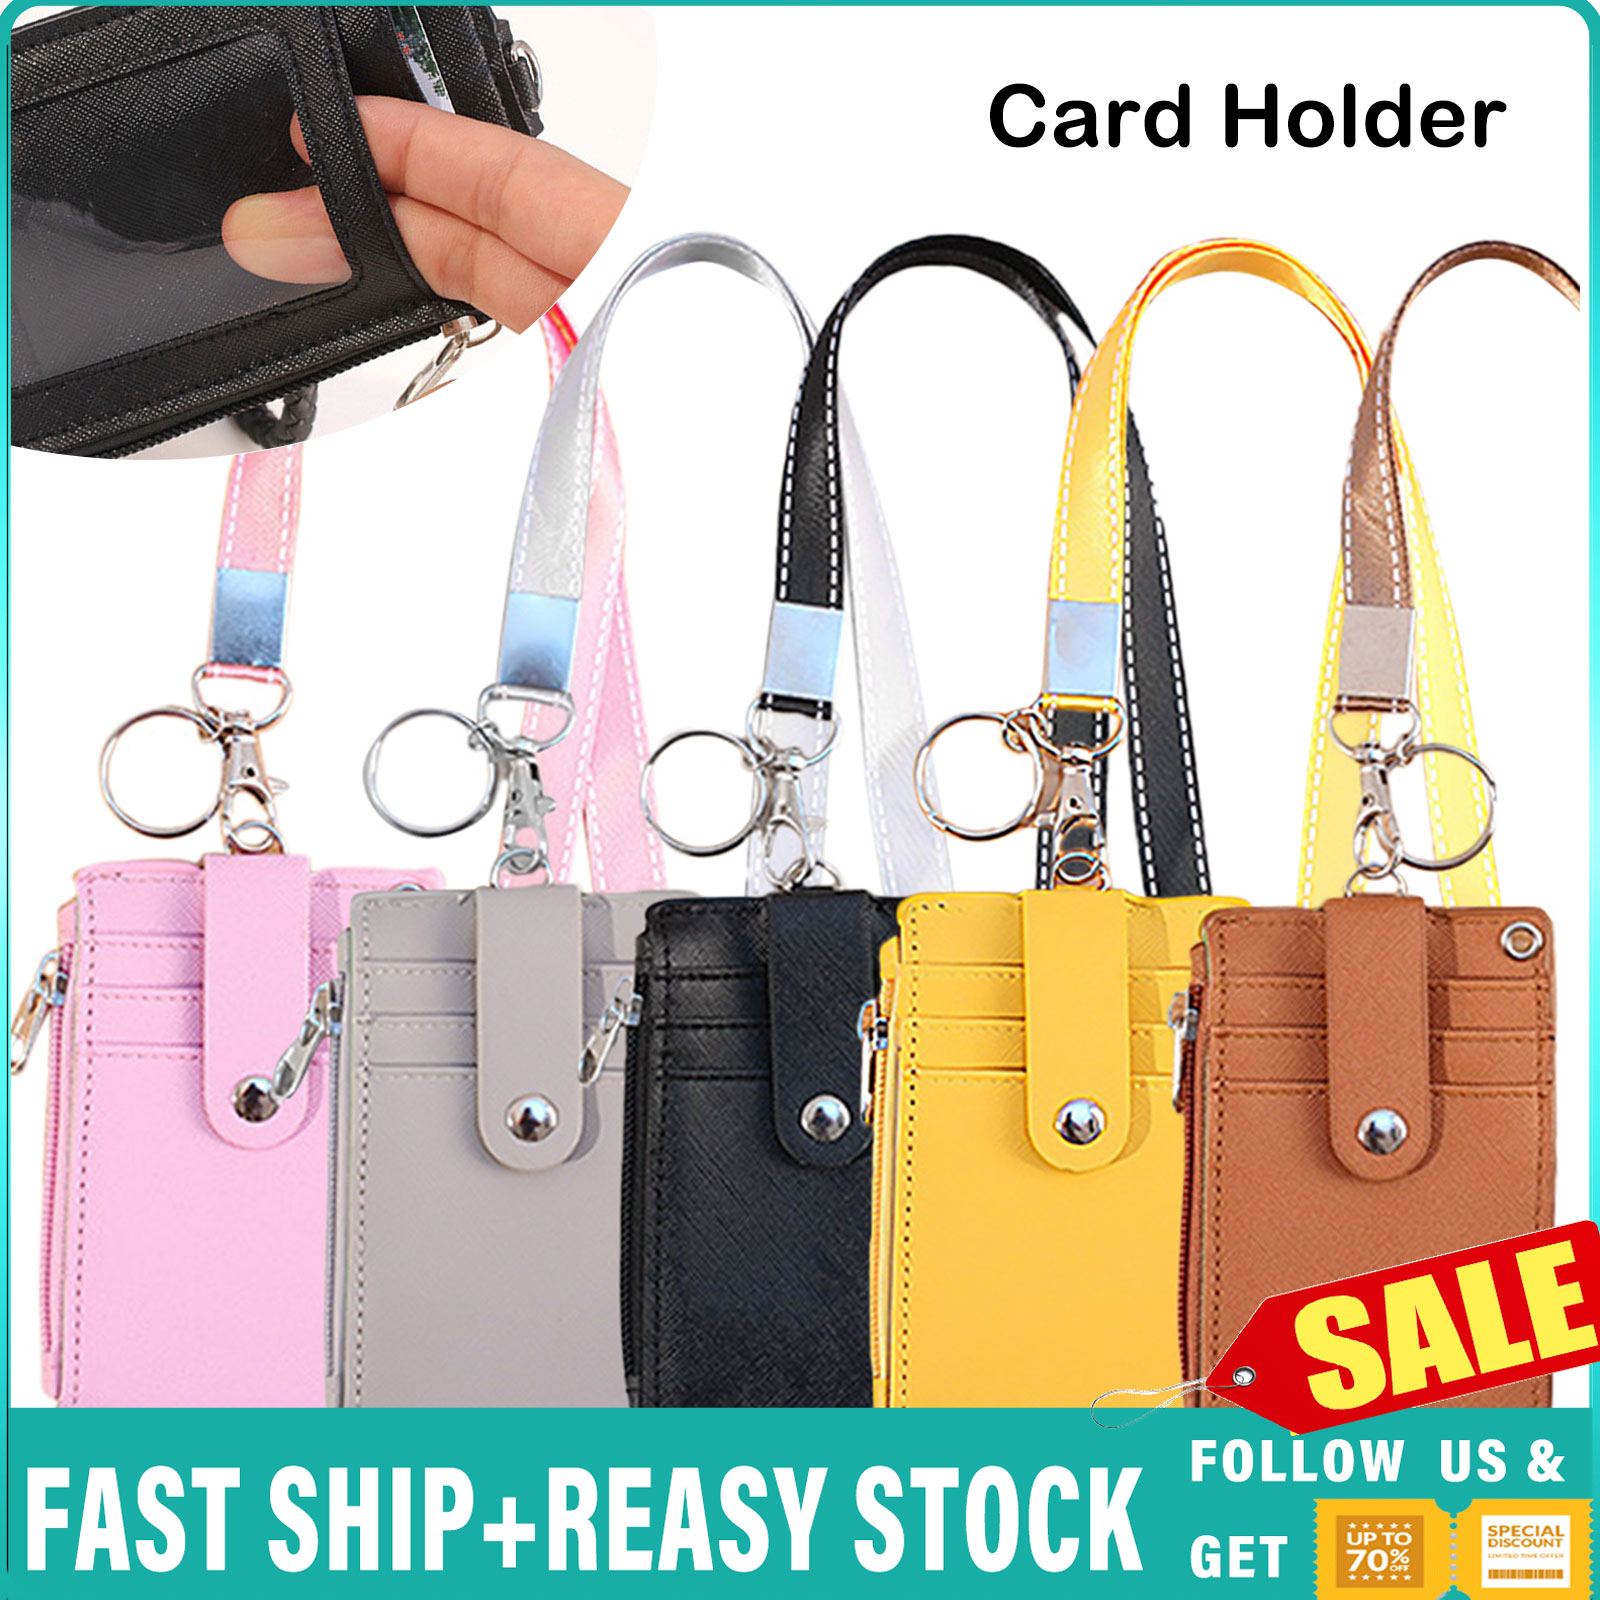 Portable Leather Business ID Card Credit Badge Holder Coin Purse Wallet  Keychain 